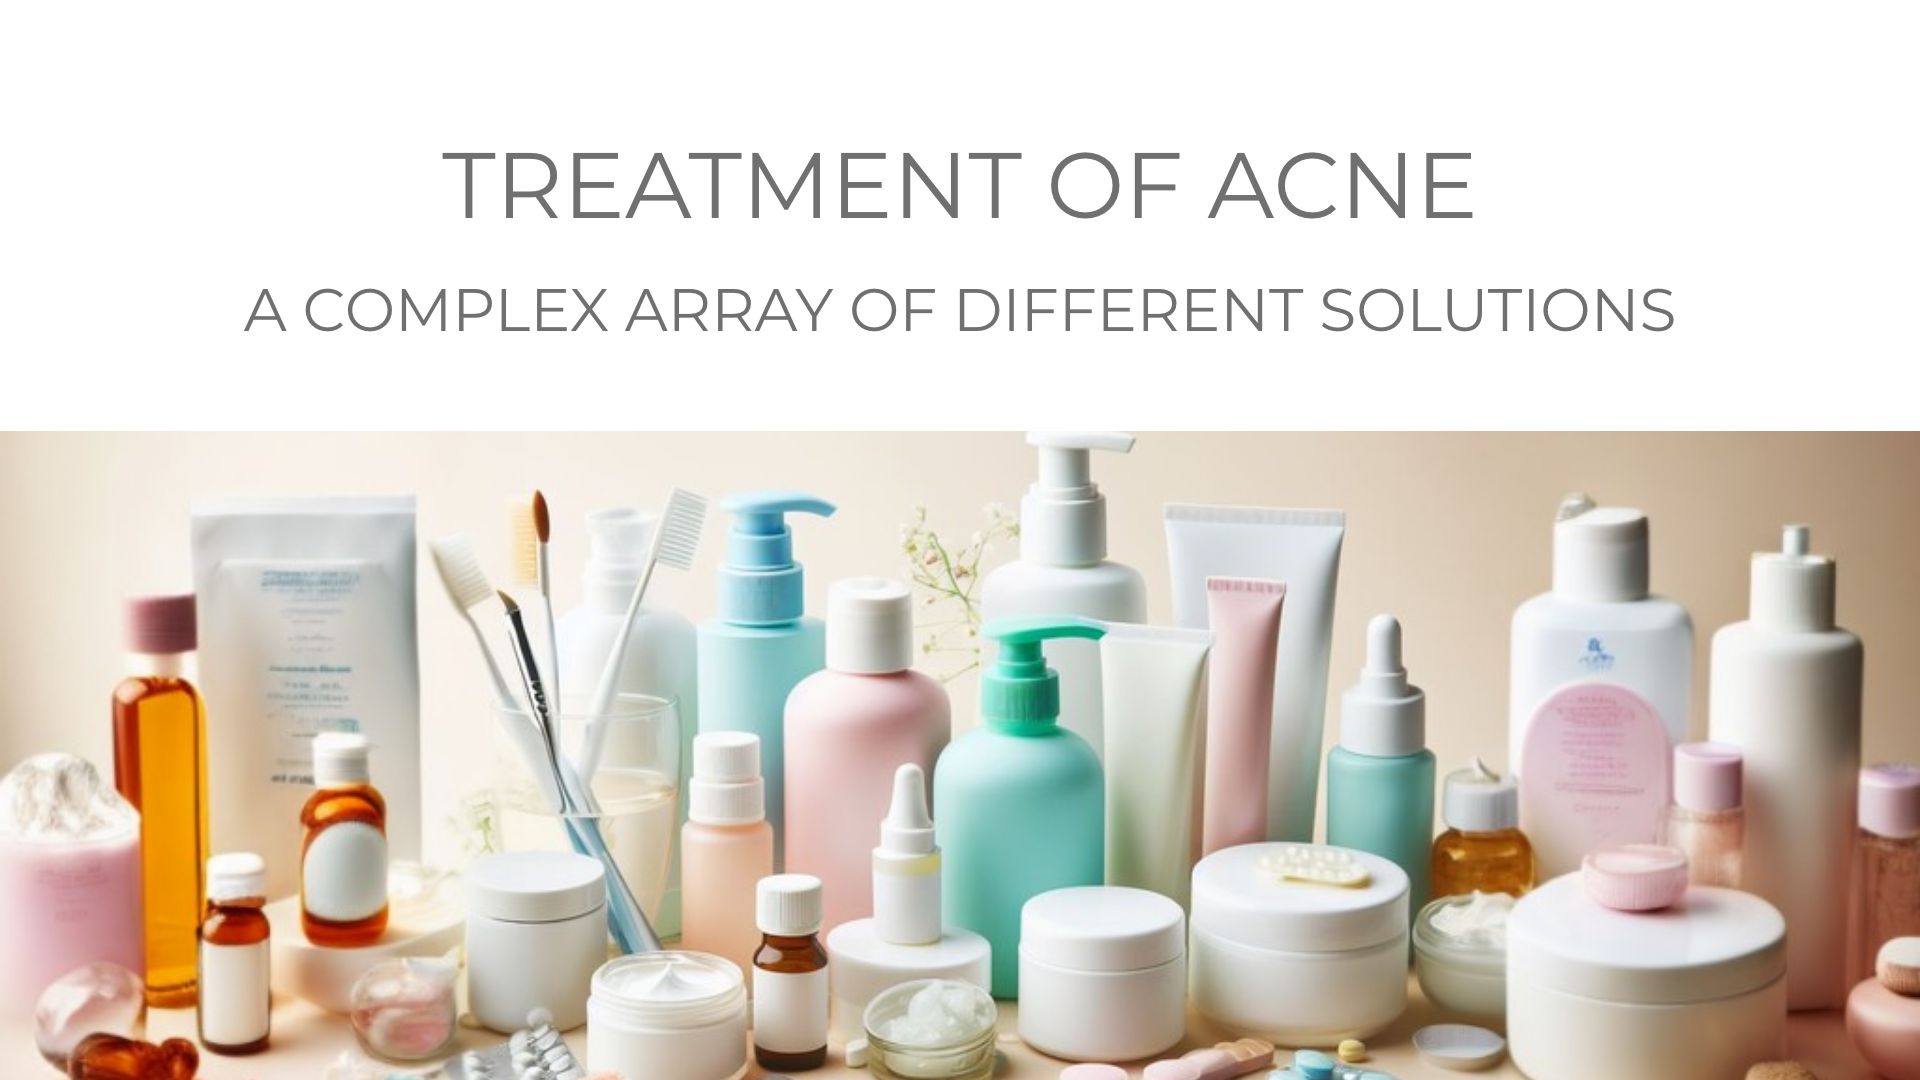 An image showing the large amount of different acne treaments available